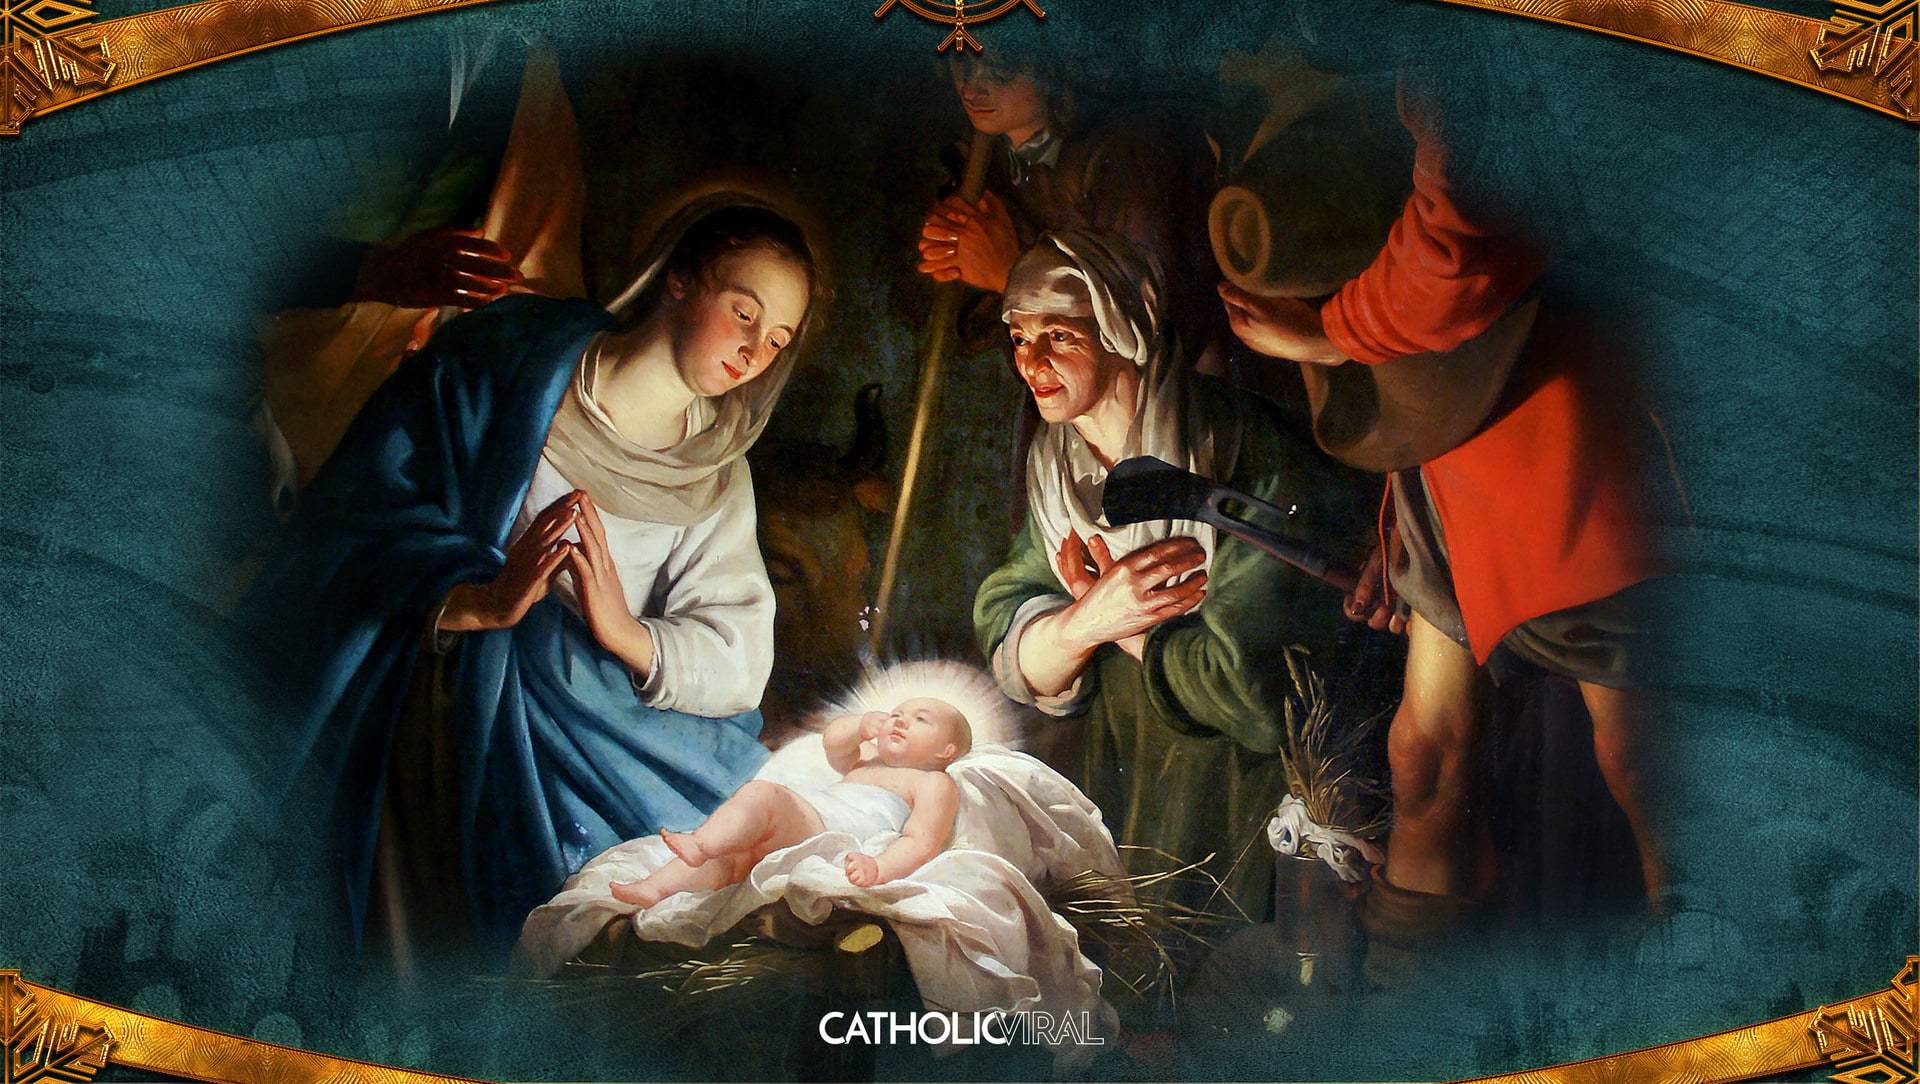 Gorgeous Classical Paintings of the Nativity- HD Christmas Wallpaper CatholicViral